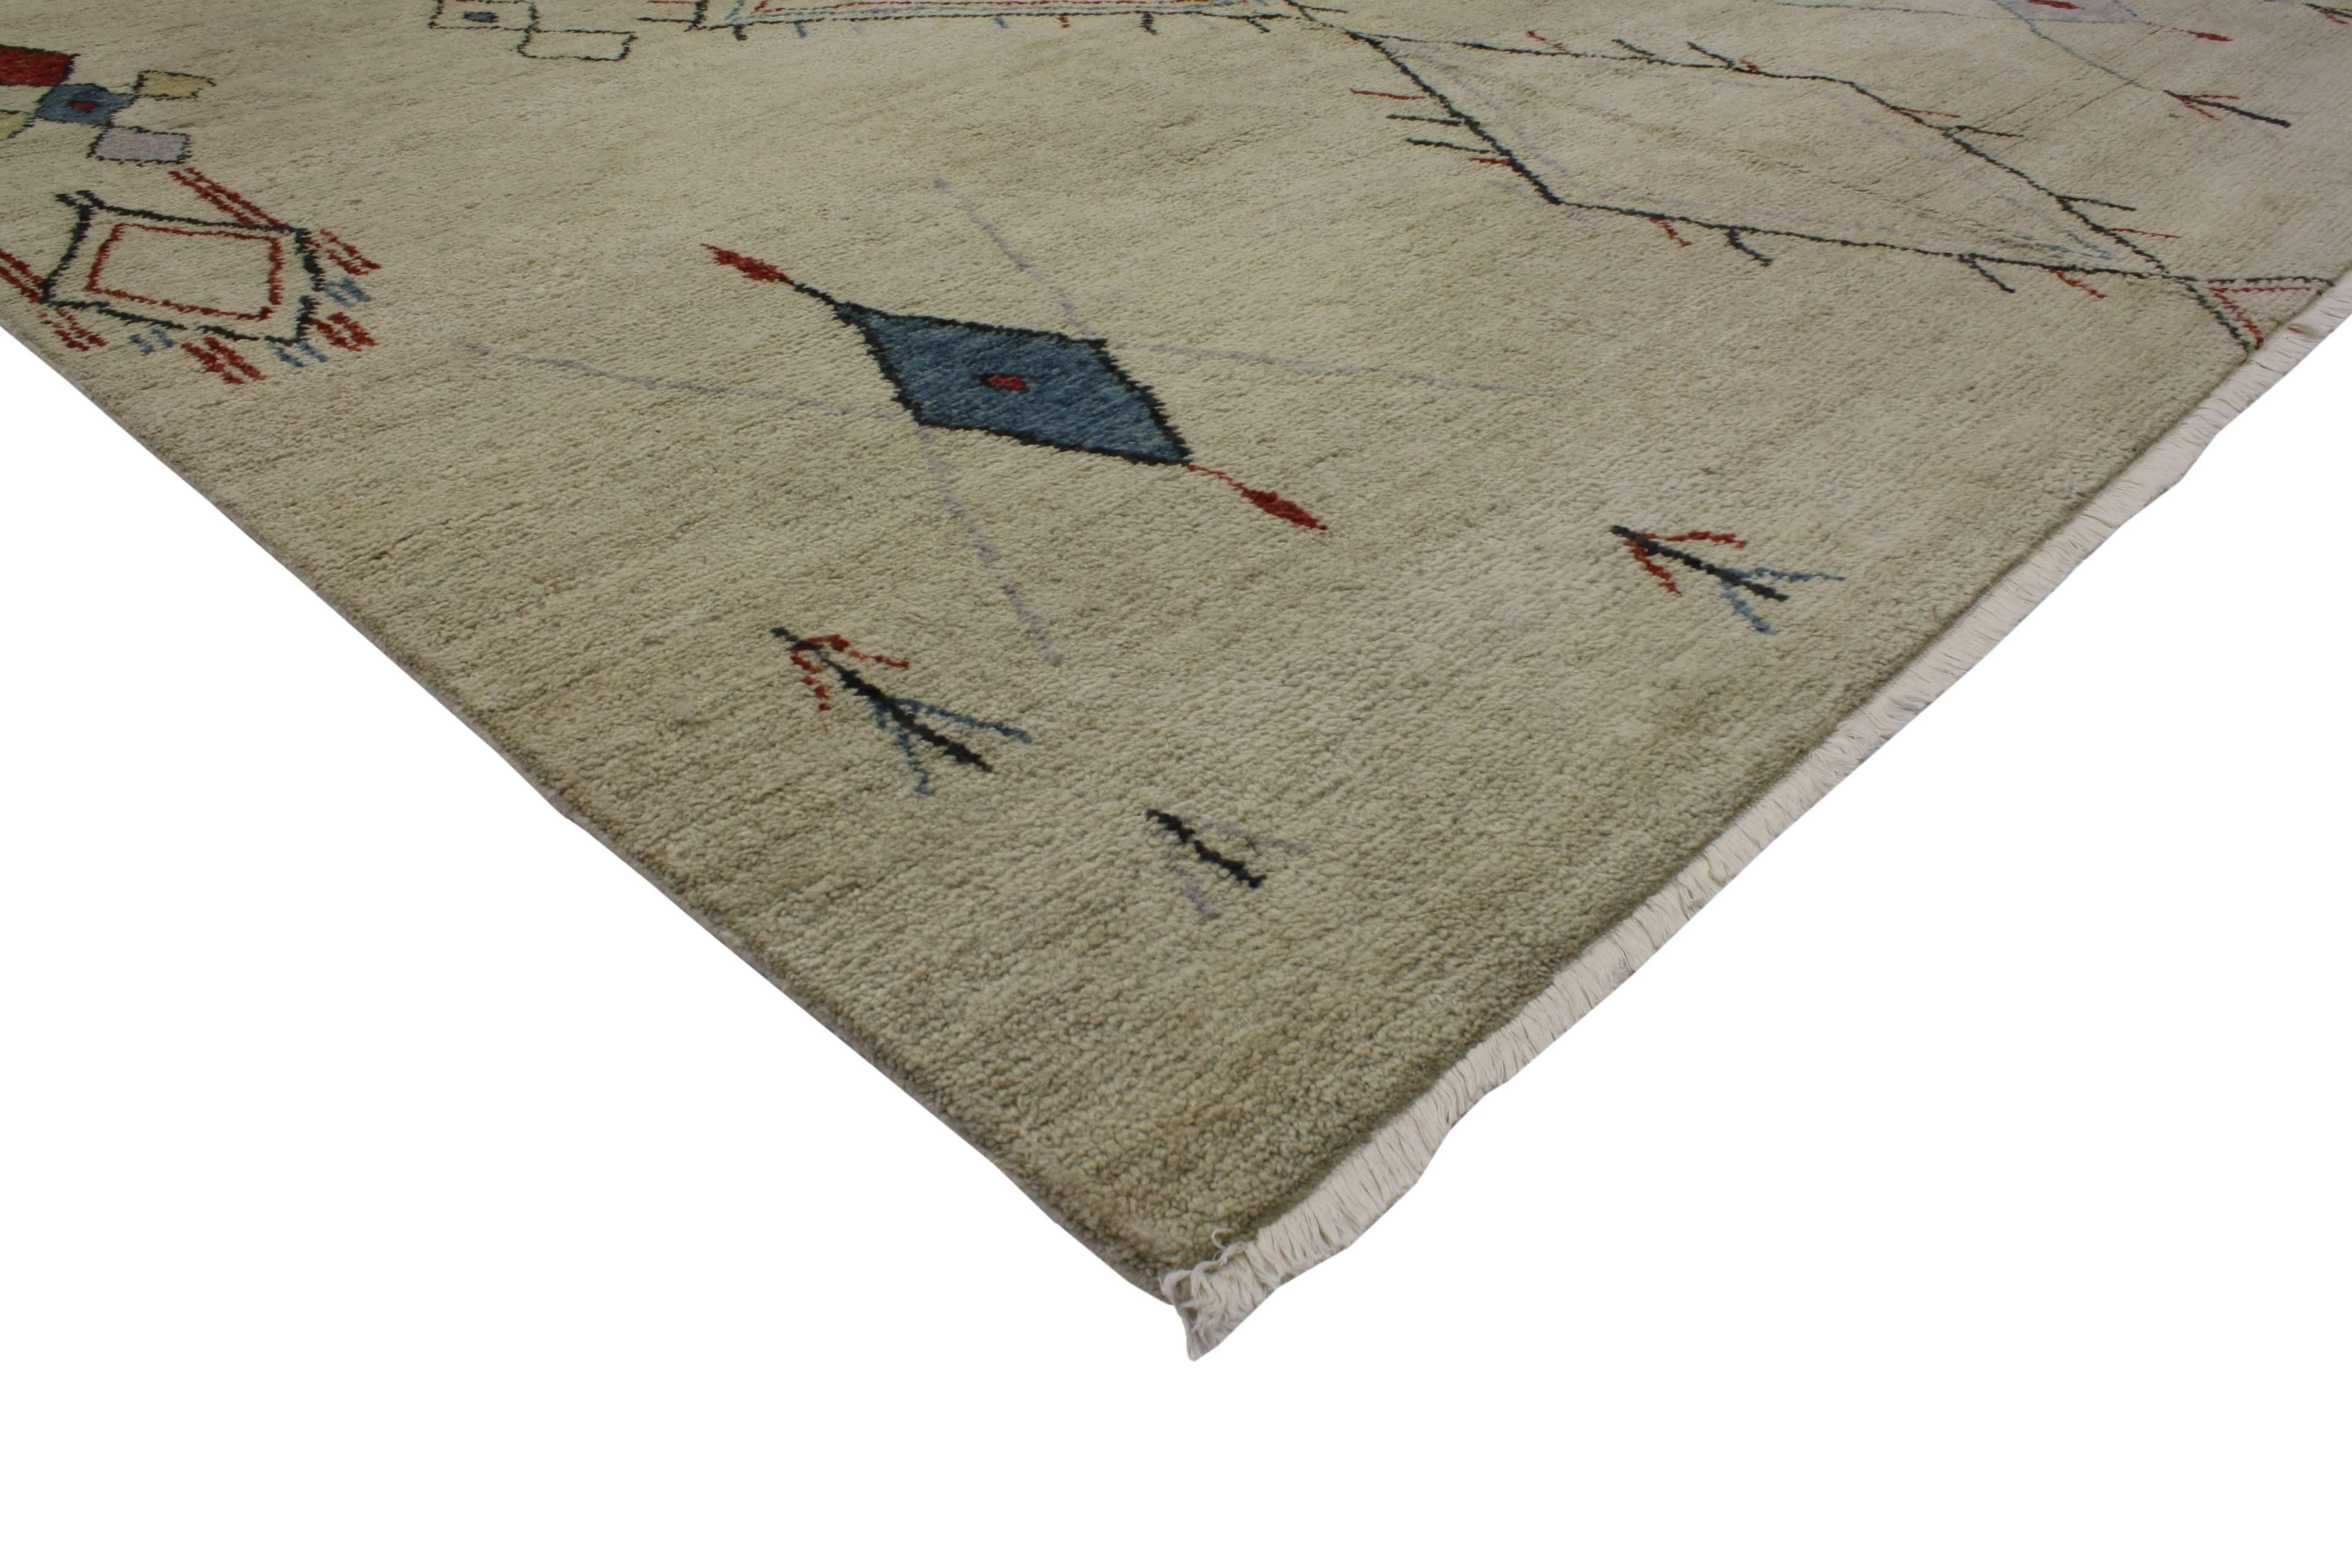 With its stylish levels of complexity combined with Folk Art creativity, this Contemporary Moroccan style area rug is an impeccable representation of Modern Tribal Design in the 21st century. The free-form tribal motifs beautifully synthesize with